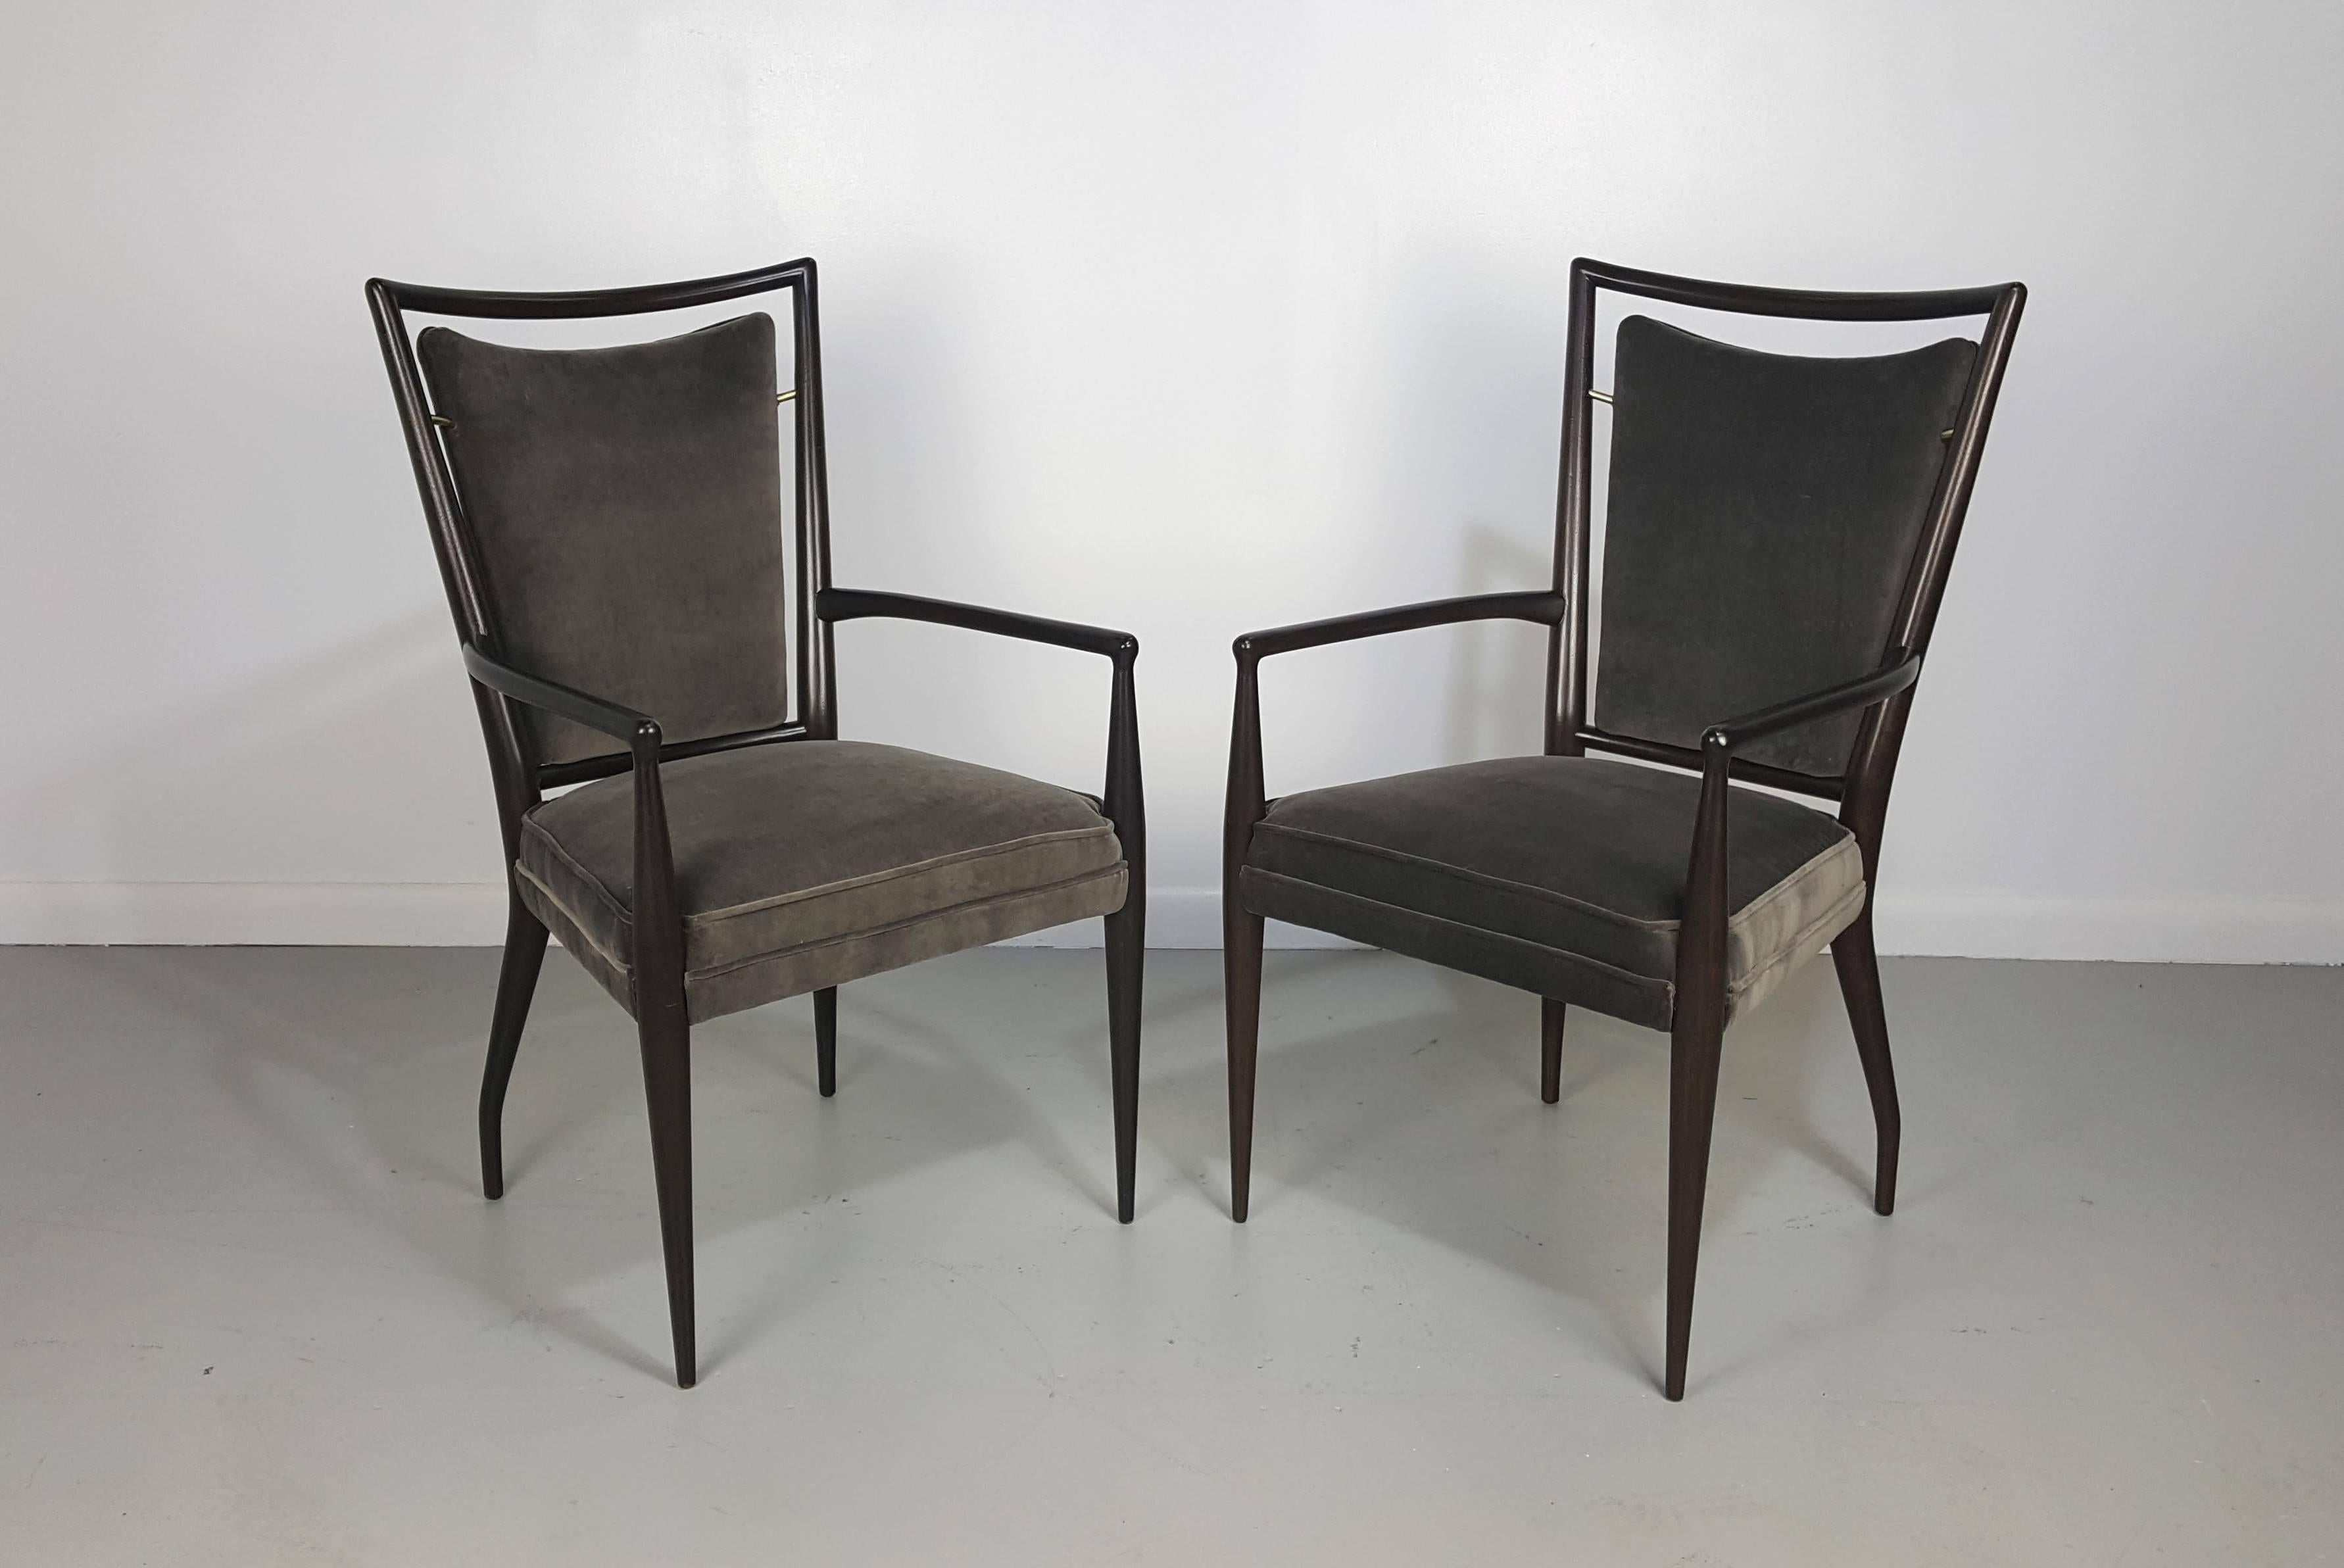 Pair of Sculptural Mahogany Armchairs by J. Stewart Clingman, 1950s.

We offer free regular deliveries to NYC and Philadelphia area. Delivery to DC, MD, CT and MA are available if schedule permits, please message for a location-based delivery